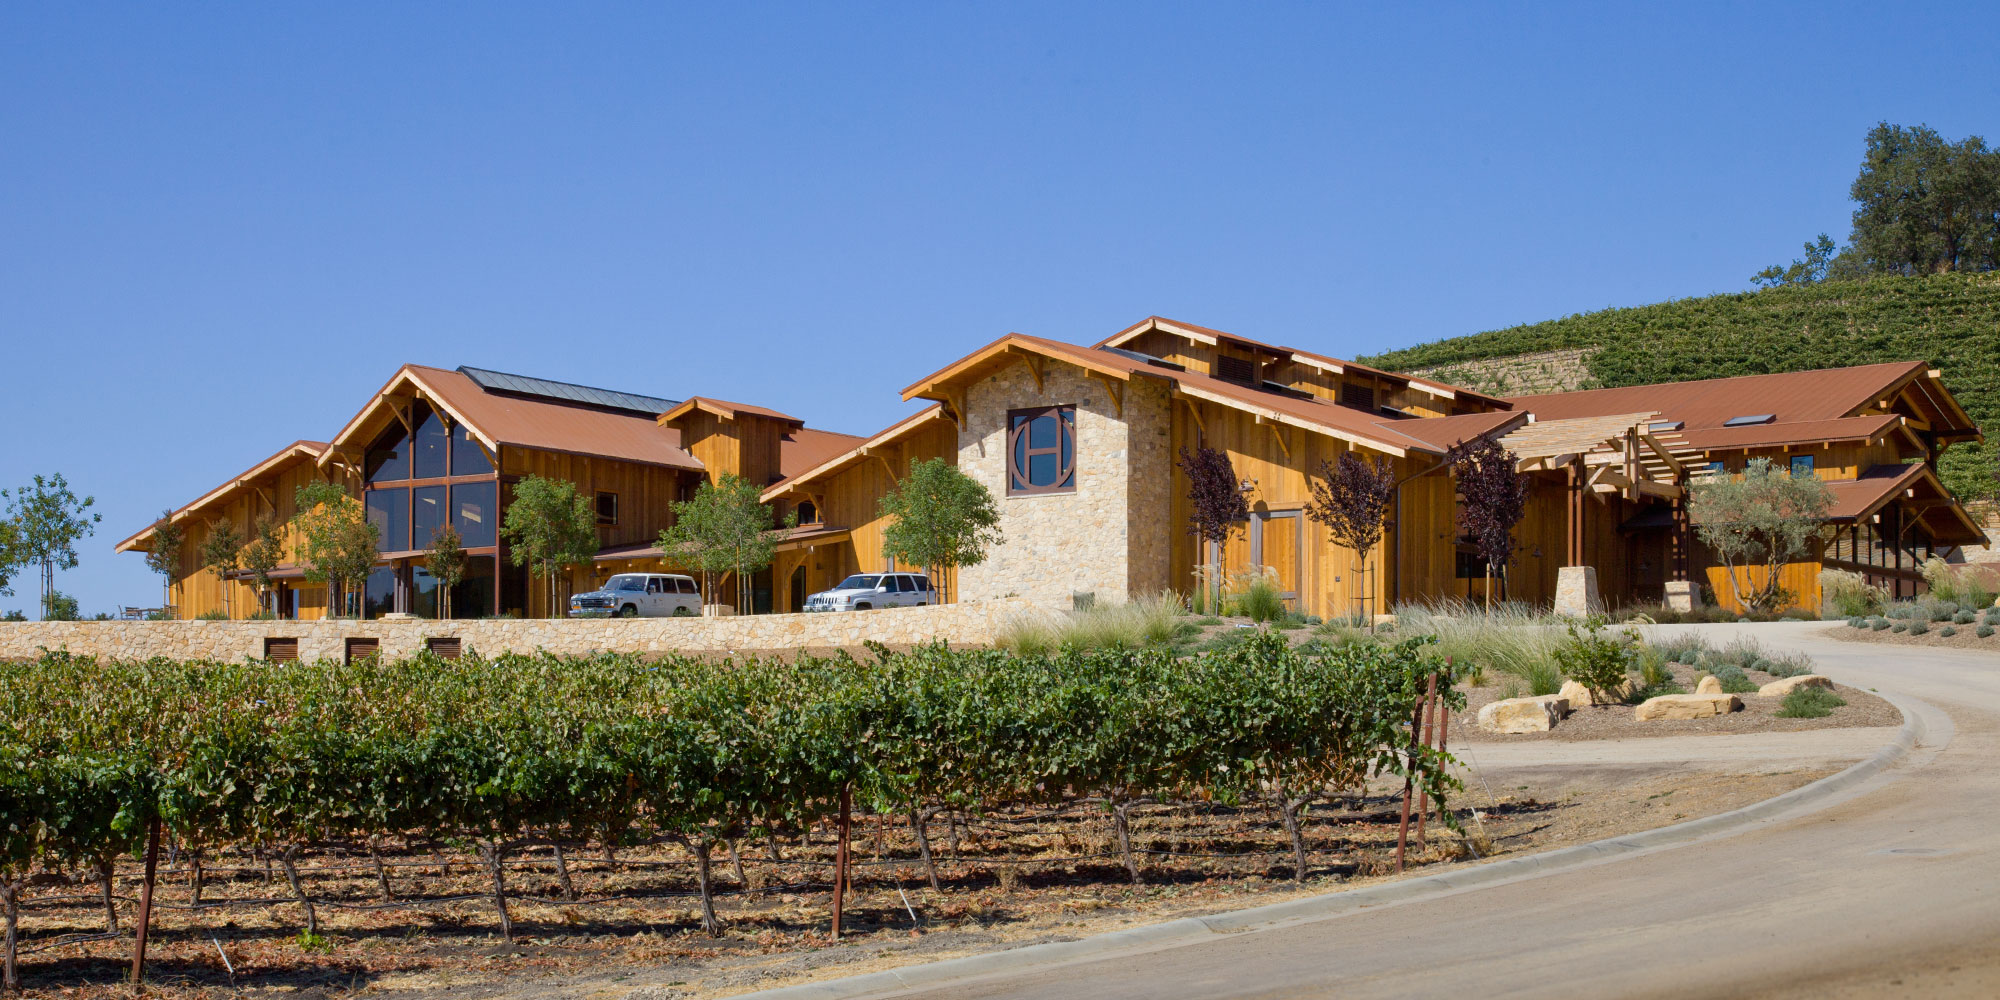 Windery Construction Company - Wine Cave Contractor - Halter Ranch Builder - JW Design and Construction